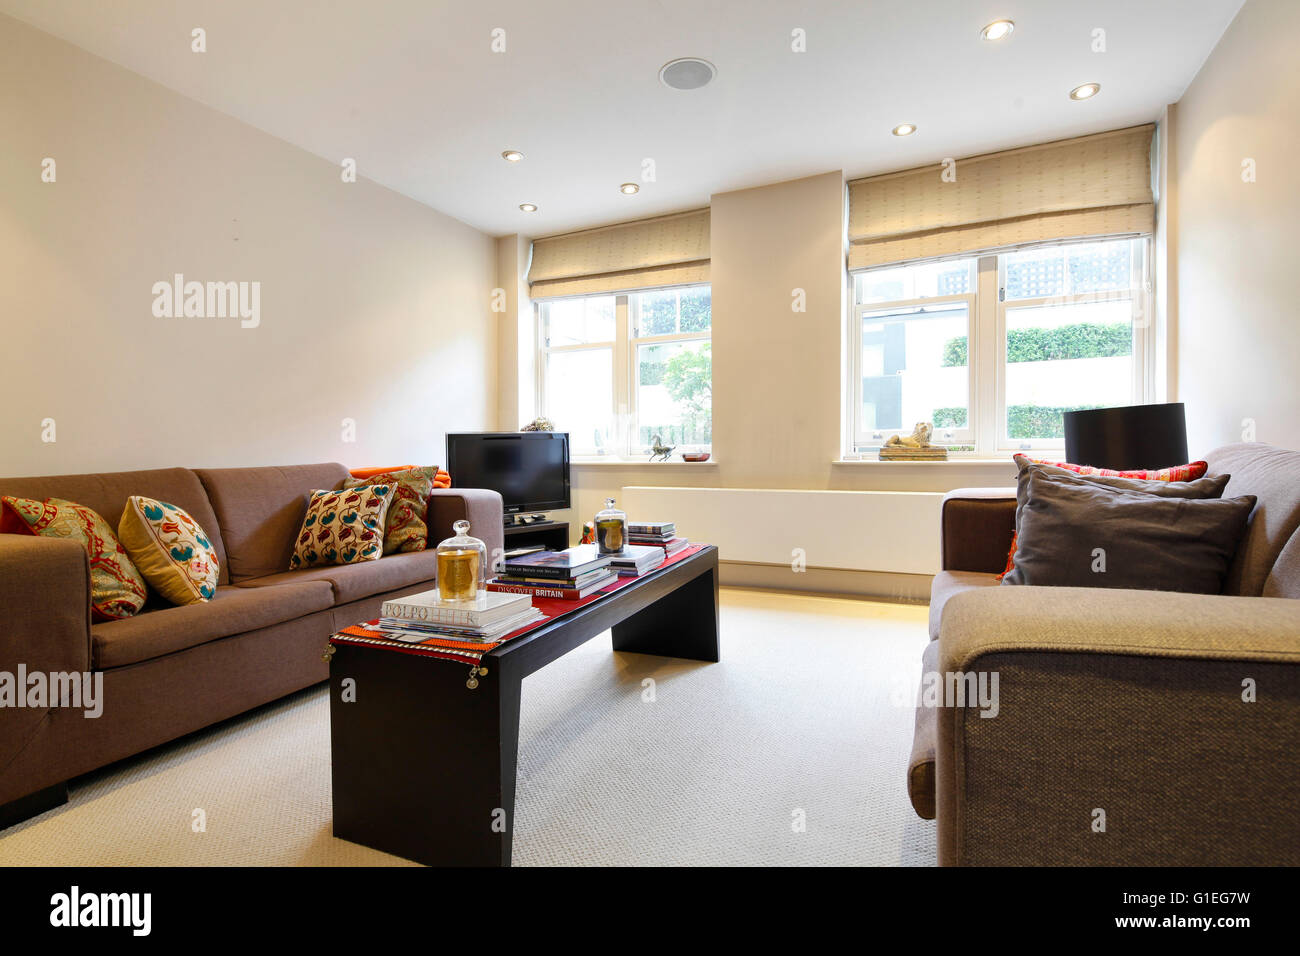 Bedford Gardens, Kensington. Spacious living room with traditional furniture and features. Stock Photo